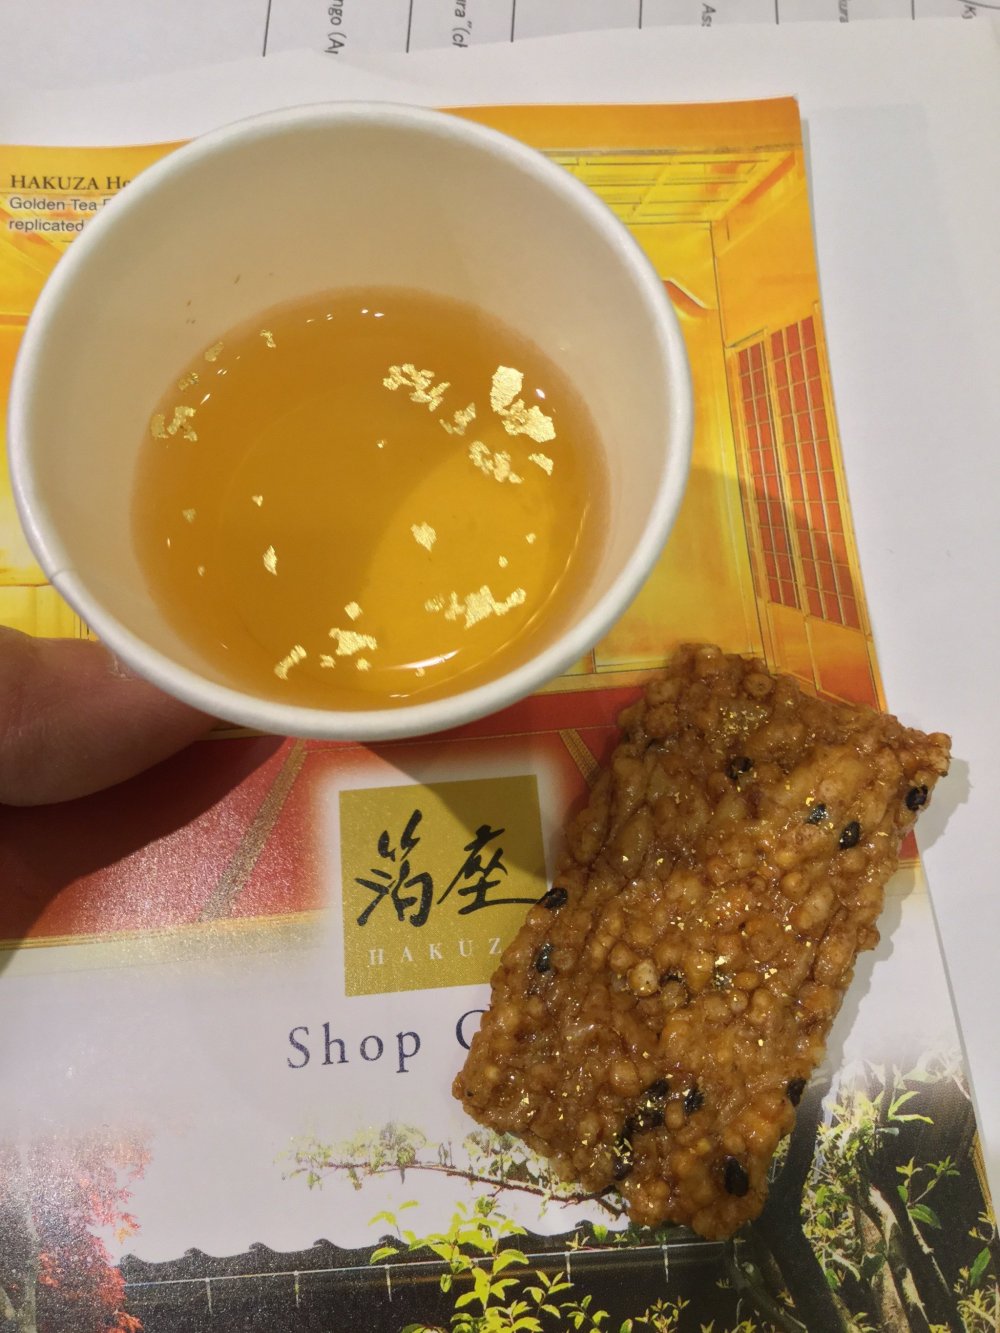 Gold flakes on tea and embedded in rice crackers.